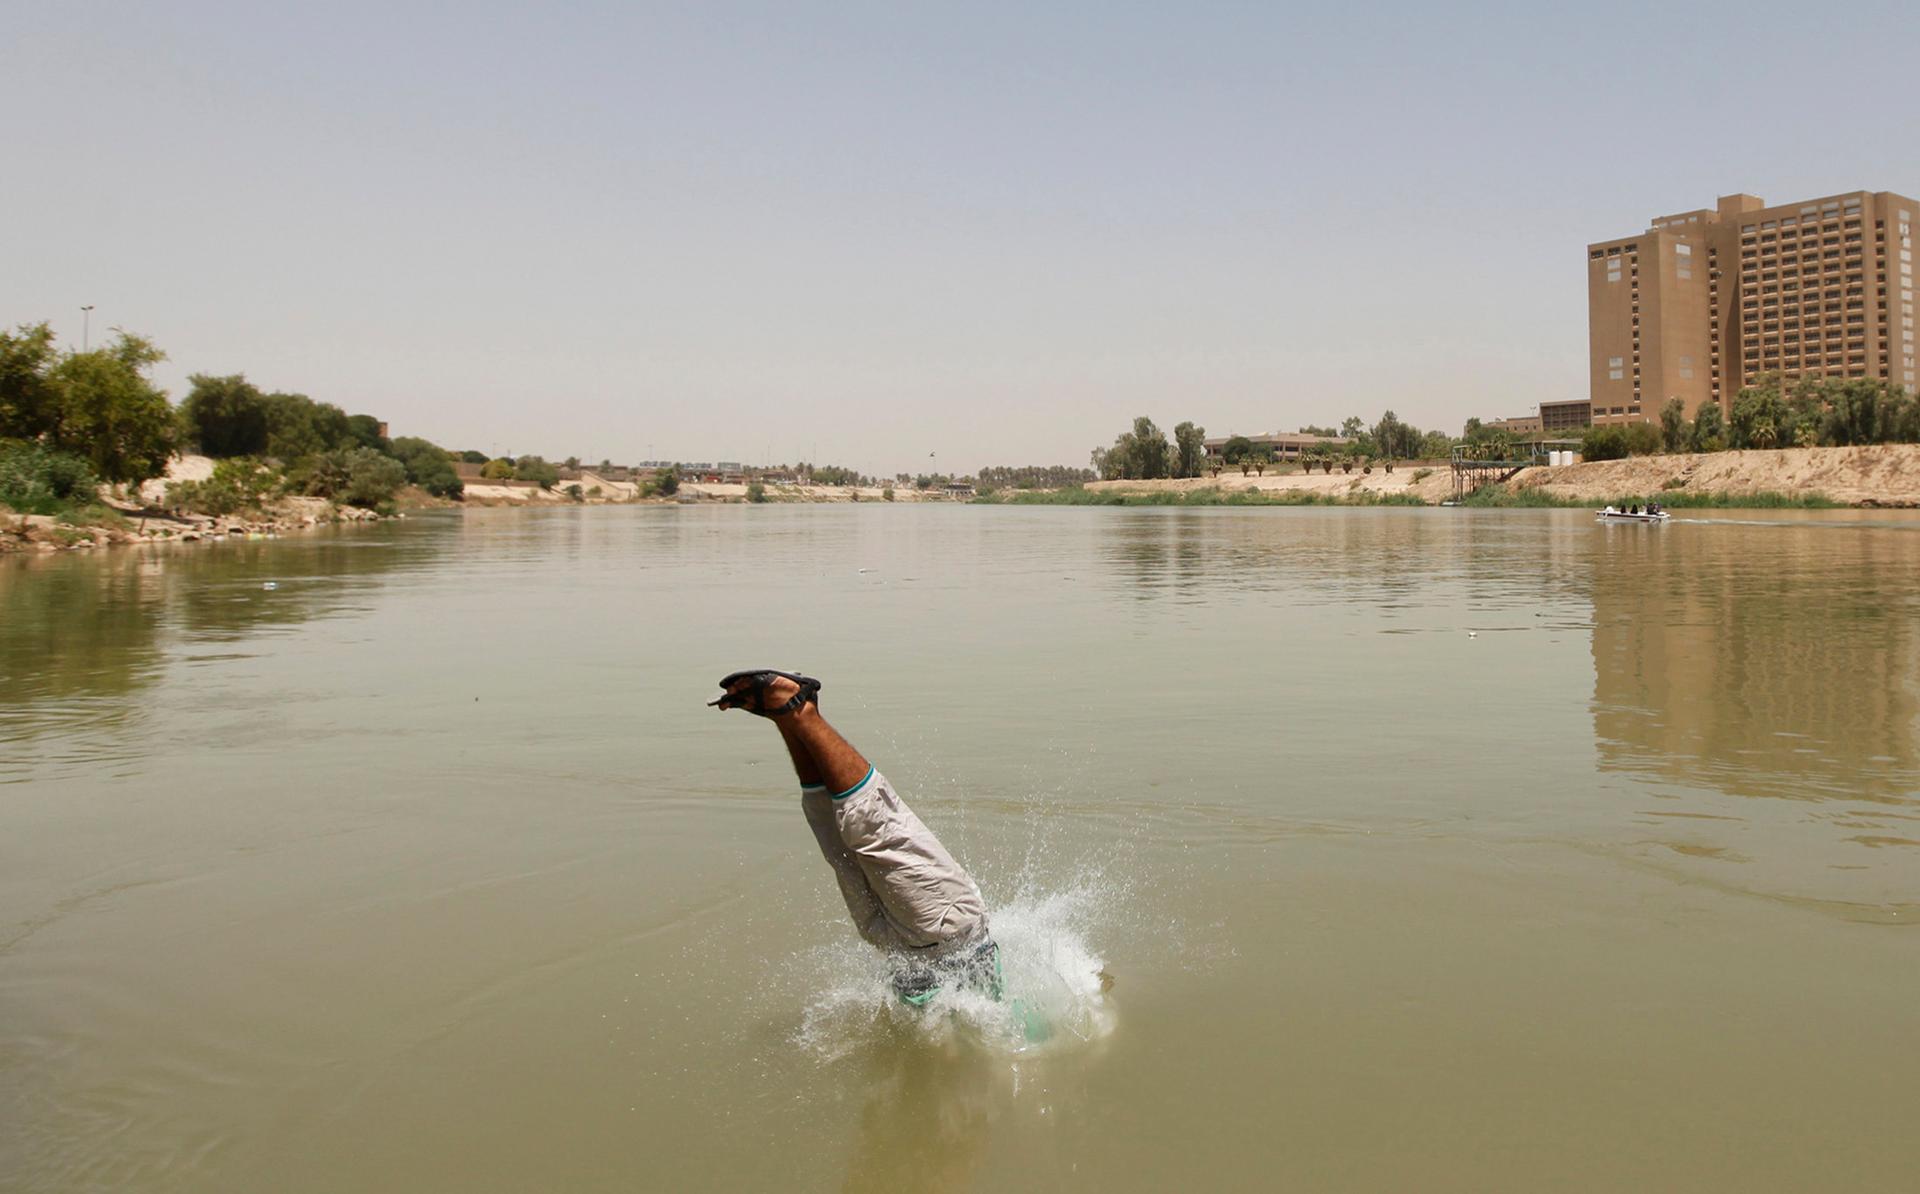 A Bagdad resident plunges into the Tigris river, sandals and all. 